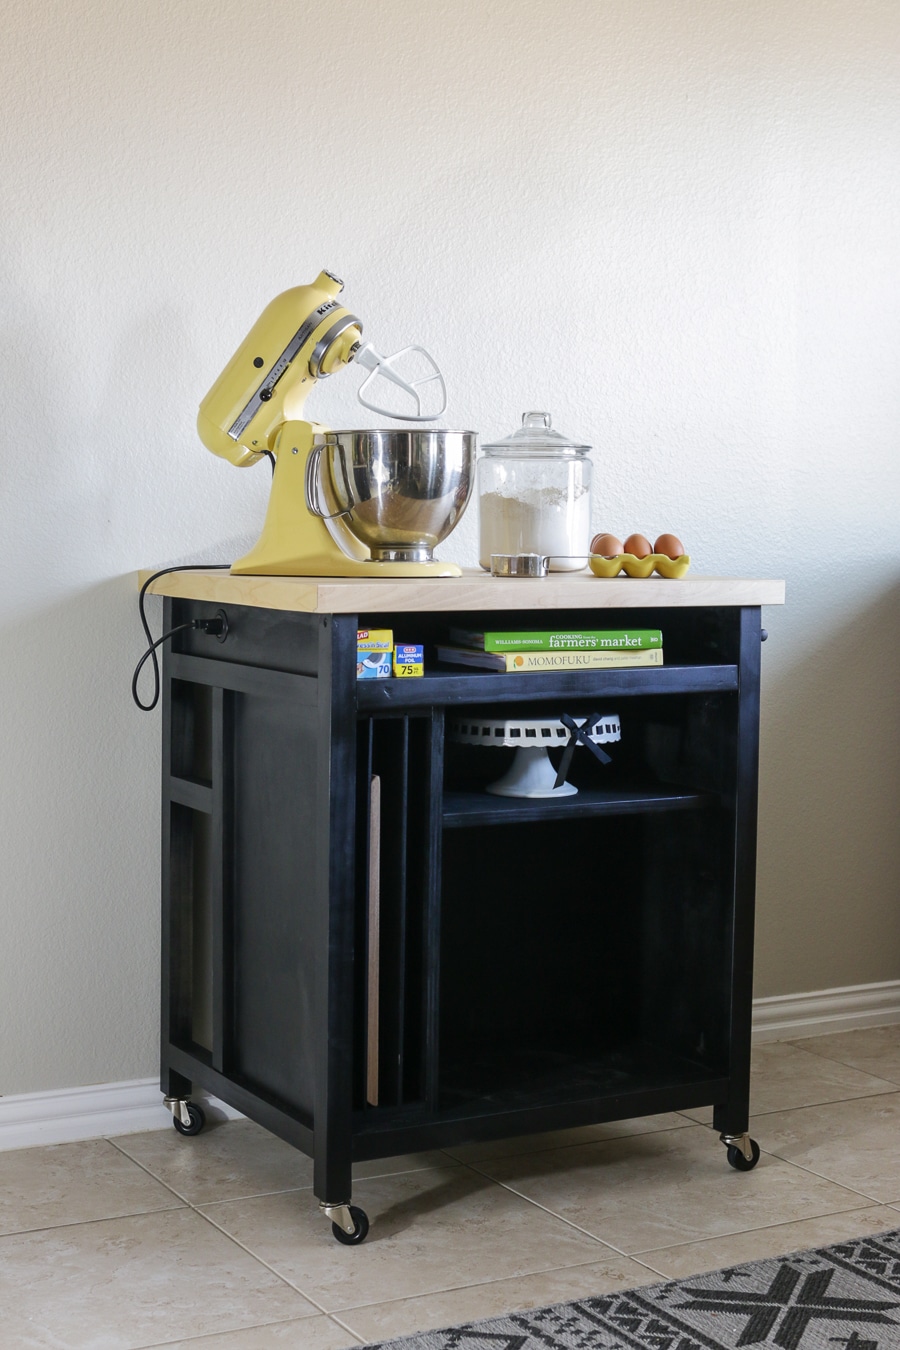 How to build a DIY kitchen island